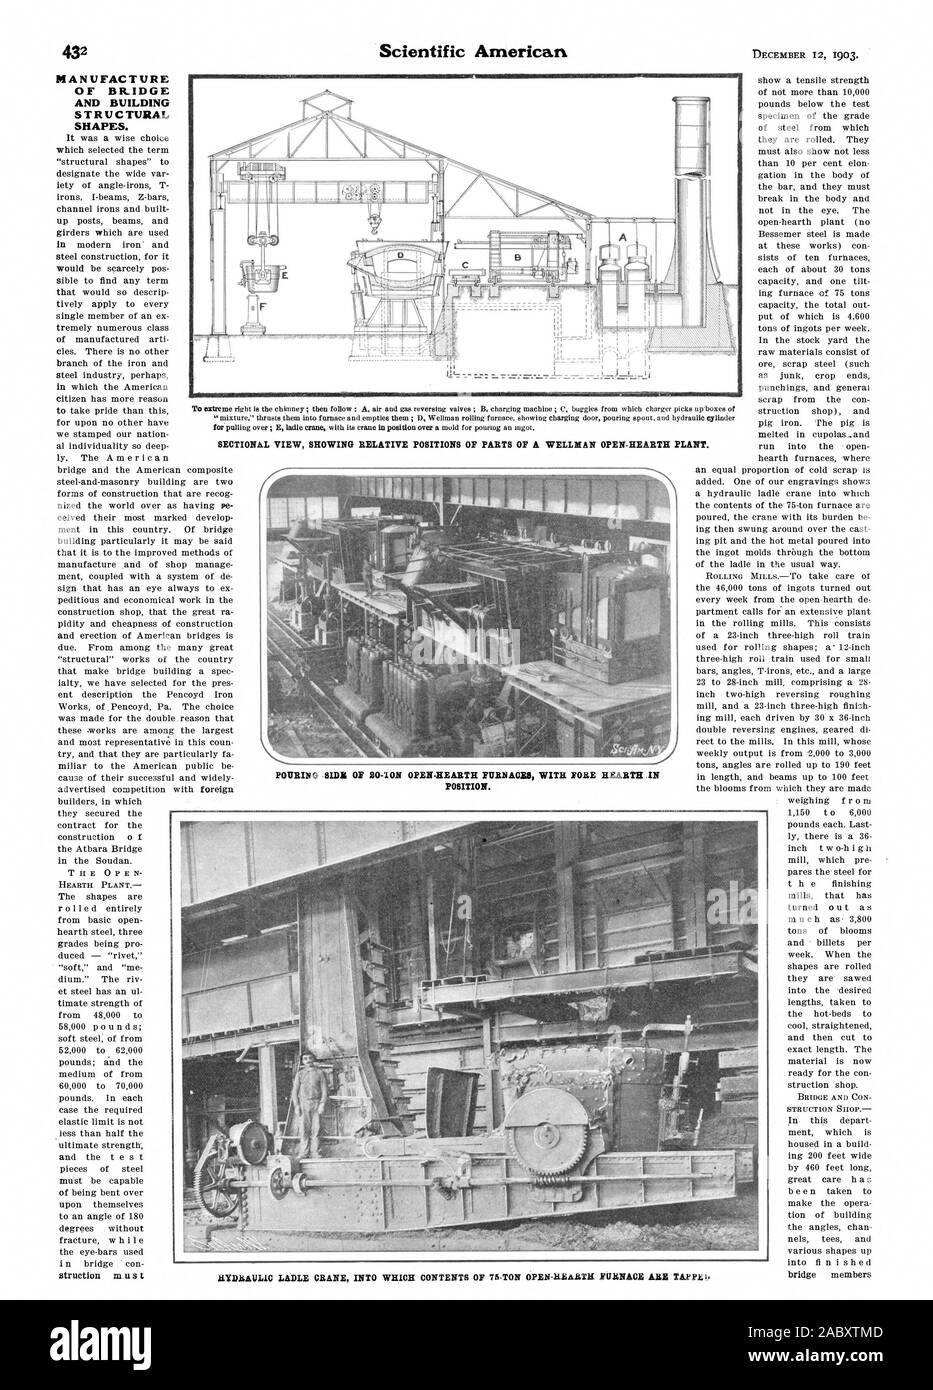 SECTIONAL VIEW SHOWING RELATIVE POSITIONS OF PARTS OF A WELLMAN OPEN-HEARTH PLA NT. POURING SID OF 20-TON OPEN-HEARTH FURNACES WITH FORE HEARTH IN POSITION. MANUFACTURE OF BRIDGE AND BUILDING STRUCTURAL SHAPES. HYDRAULIC LADLE CRANE INTO WHICH CONTENTS OF 75-TON OPEN-HEARTH FURNACE ARE TAPP, scientific american, 1903-12-12 Stock Photo